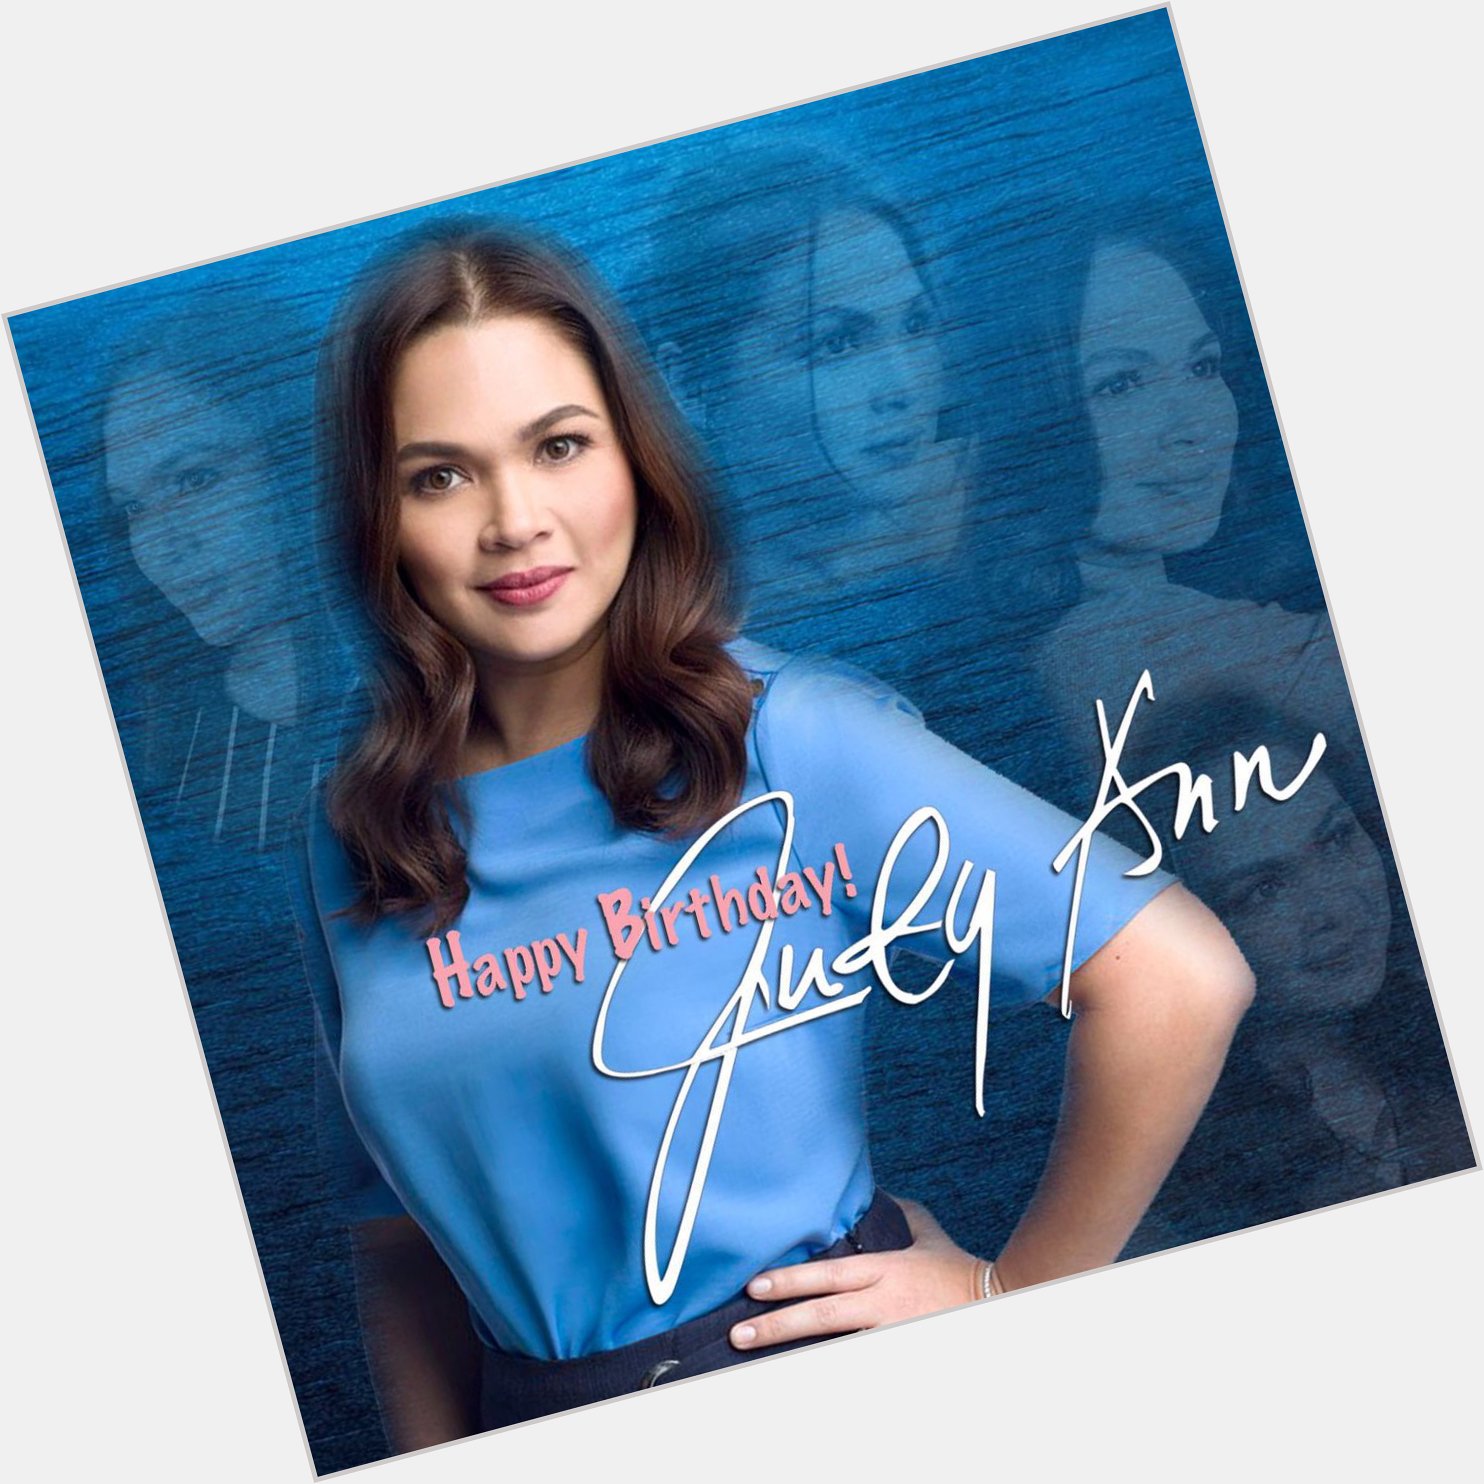 Happy Birthday, Judy Ann Santos! Stay happy and blessed!       